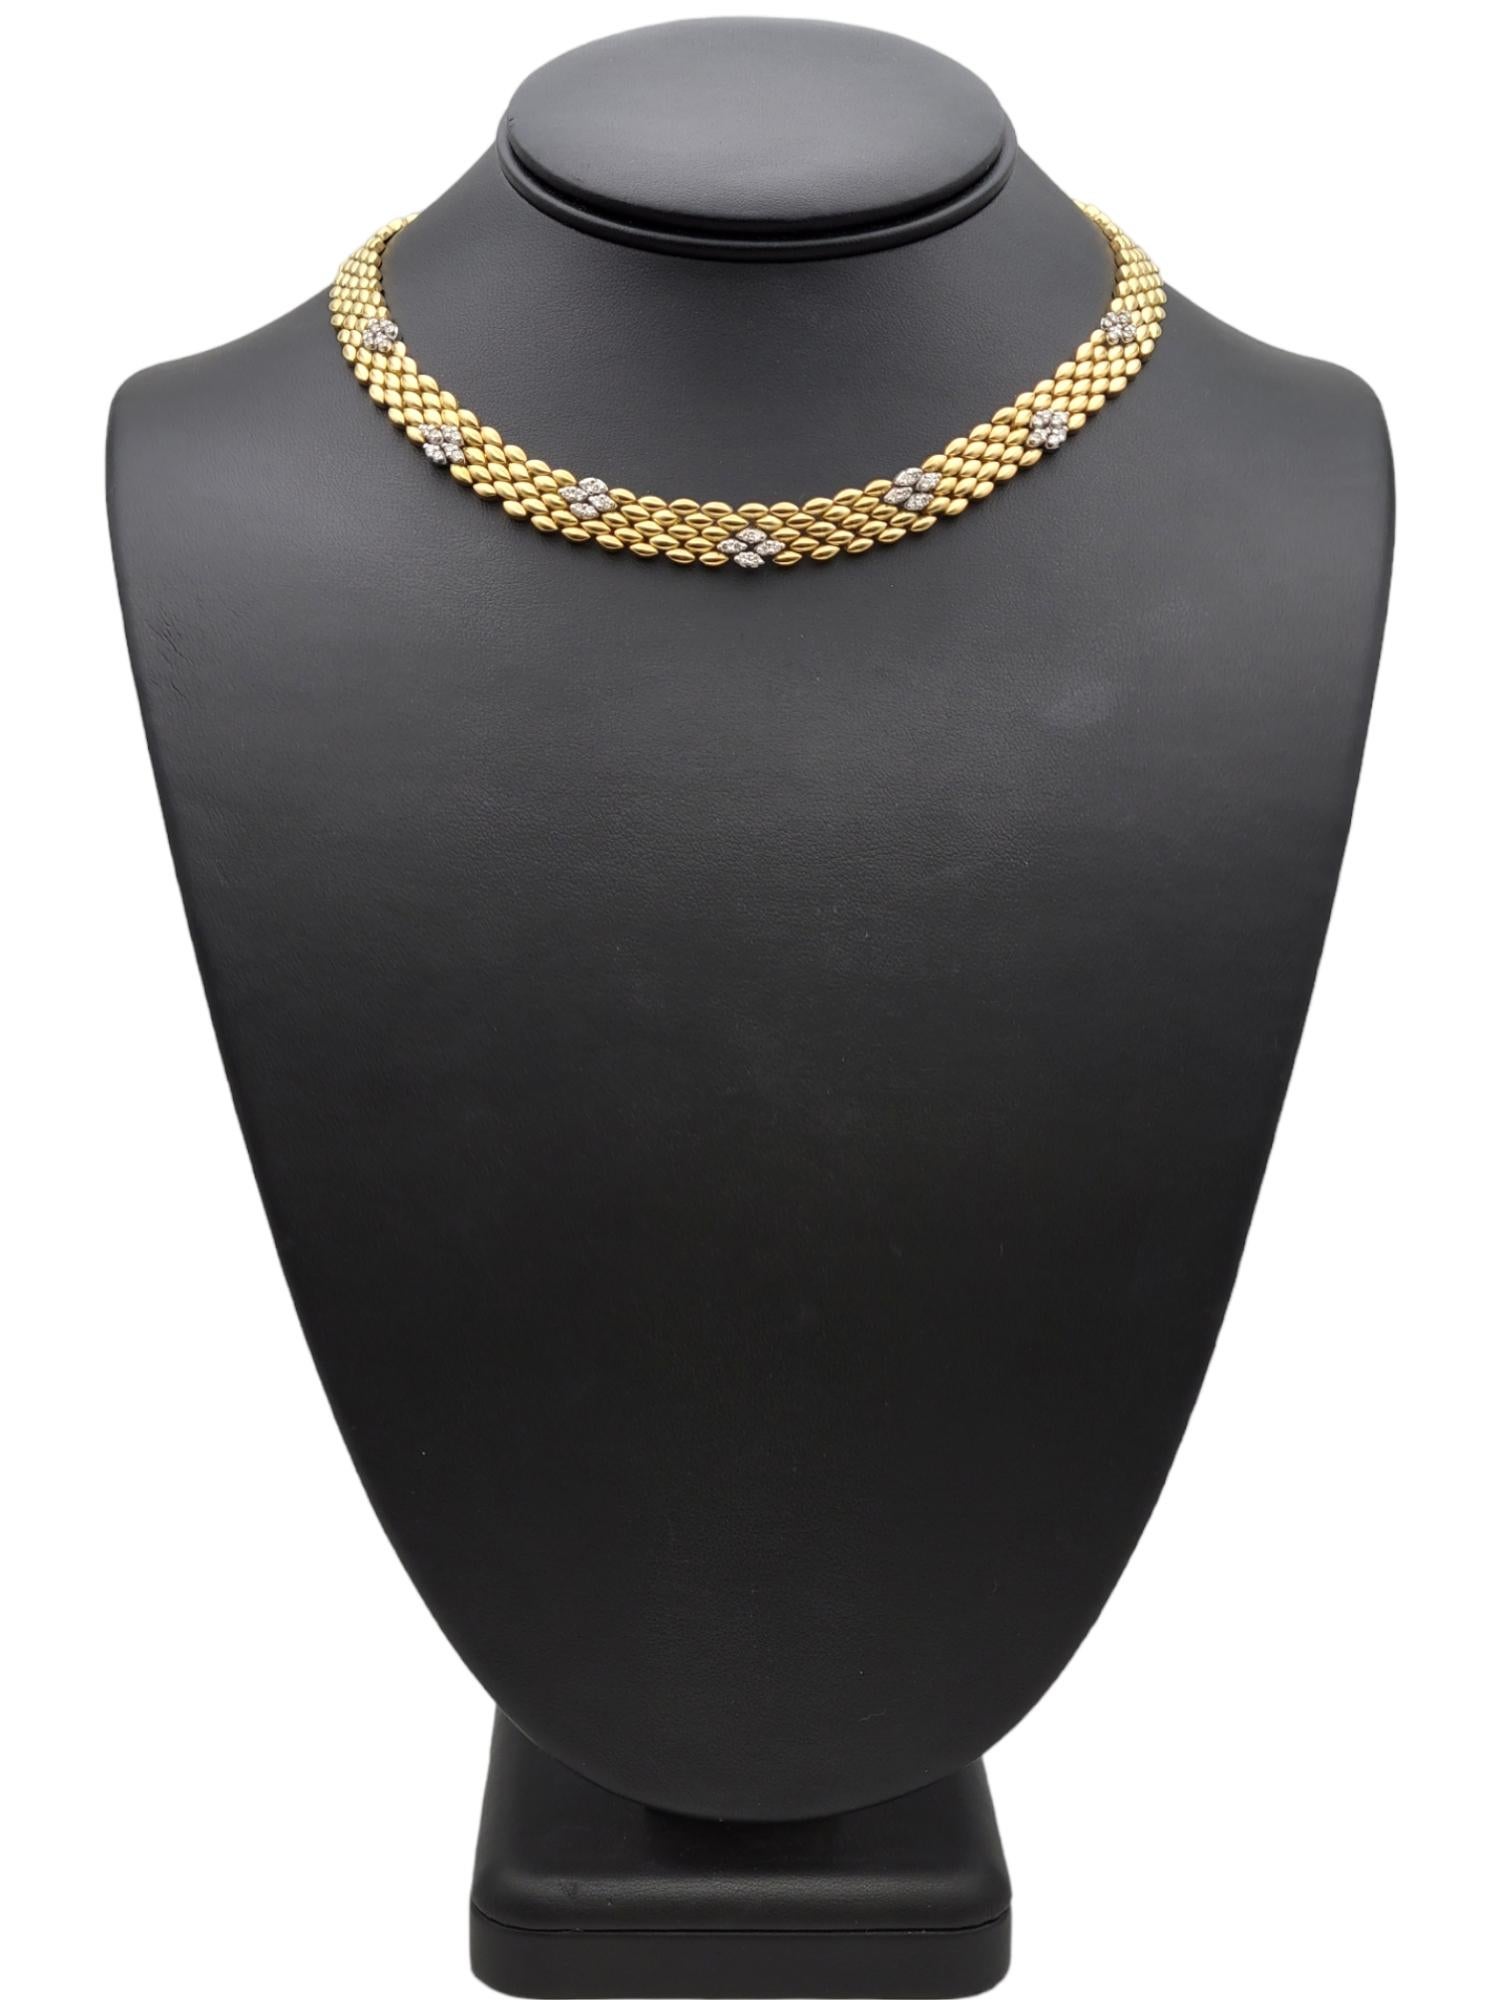 Diamond Panther Link Necklace in 18 Karat Yellow & White Gold Collar Style For Sale 4